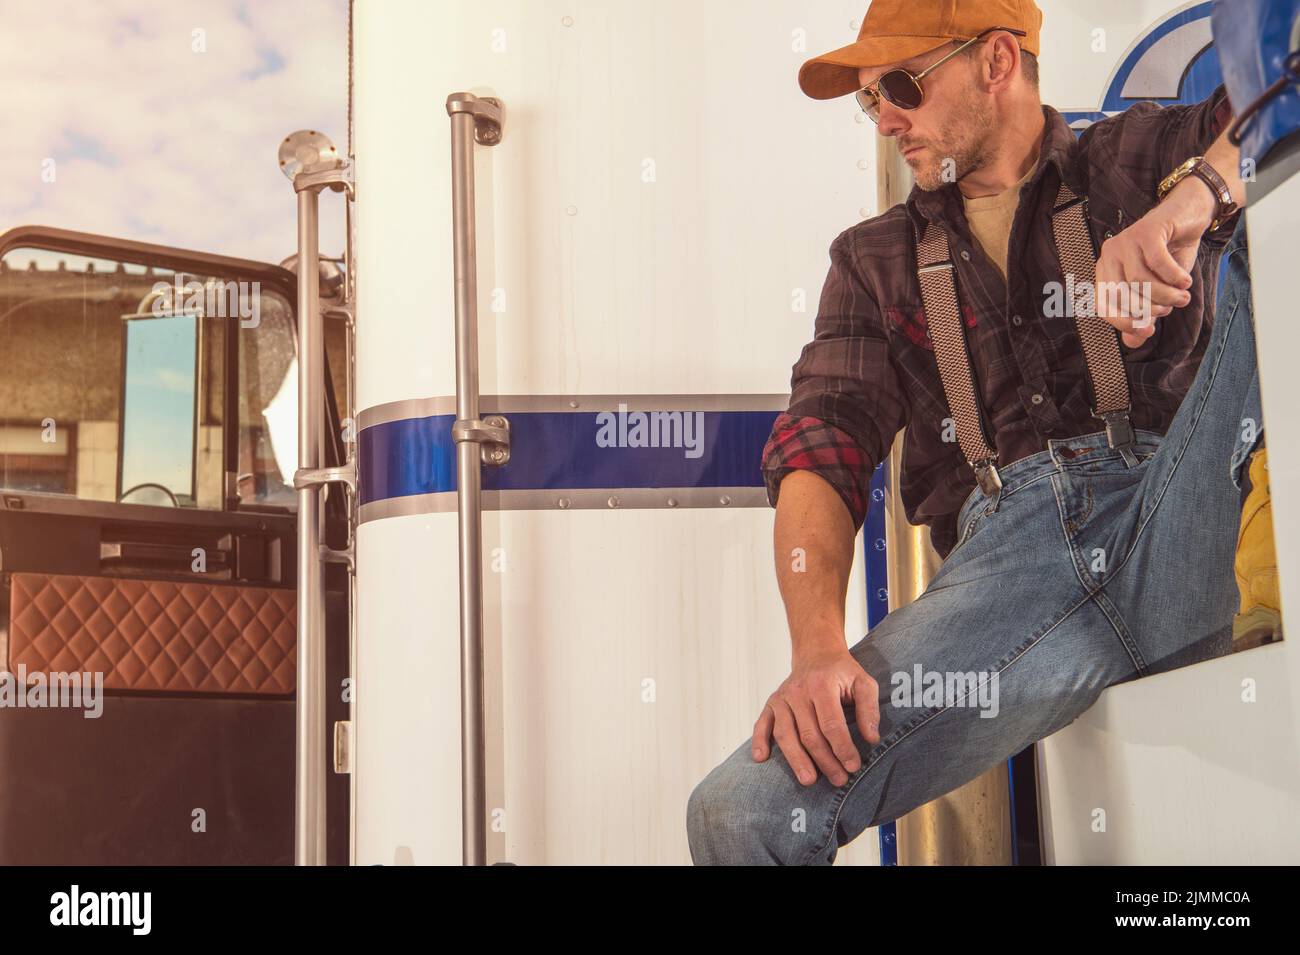 Exhausted Caucasian Middle Aged Truck Driver Sitting Outside His Lorry Taking a Relaxing Break After Challenging Route. Transportation Industry Theme. Stock Photo